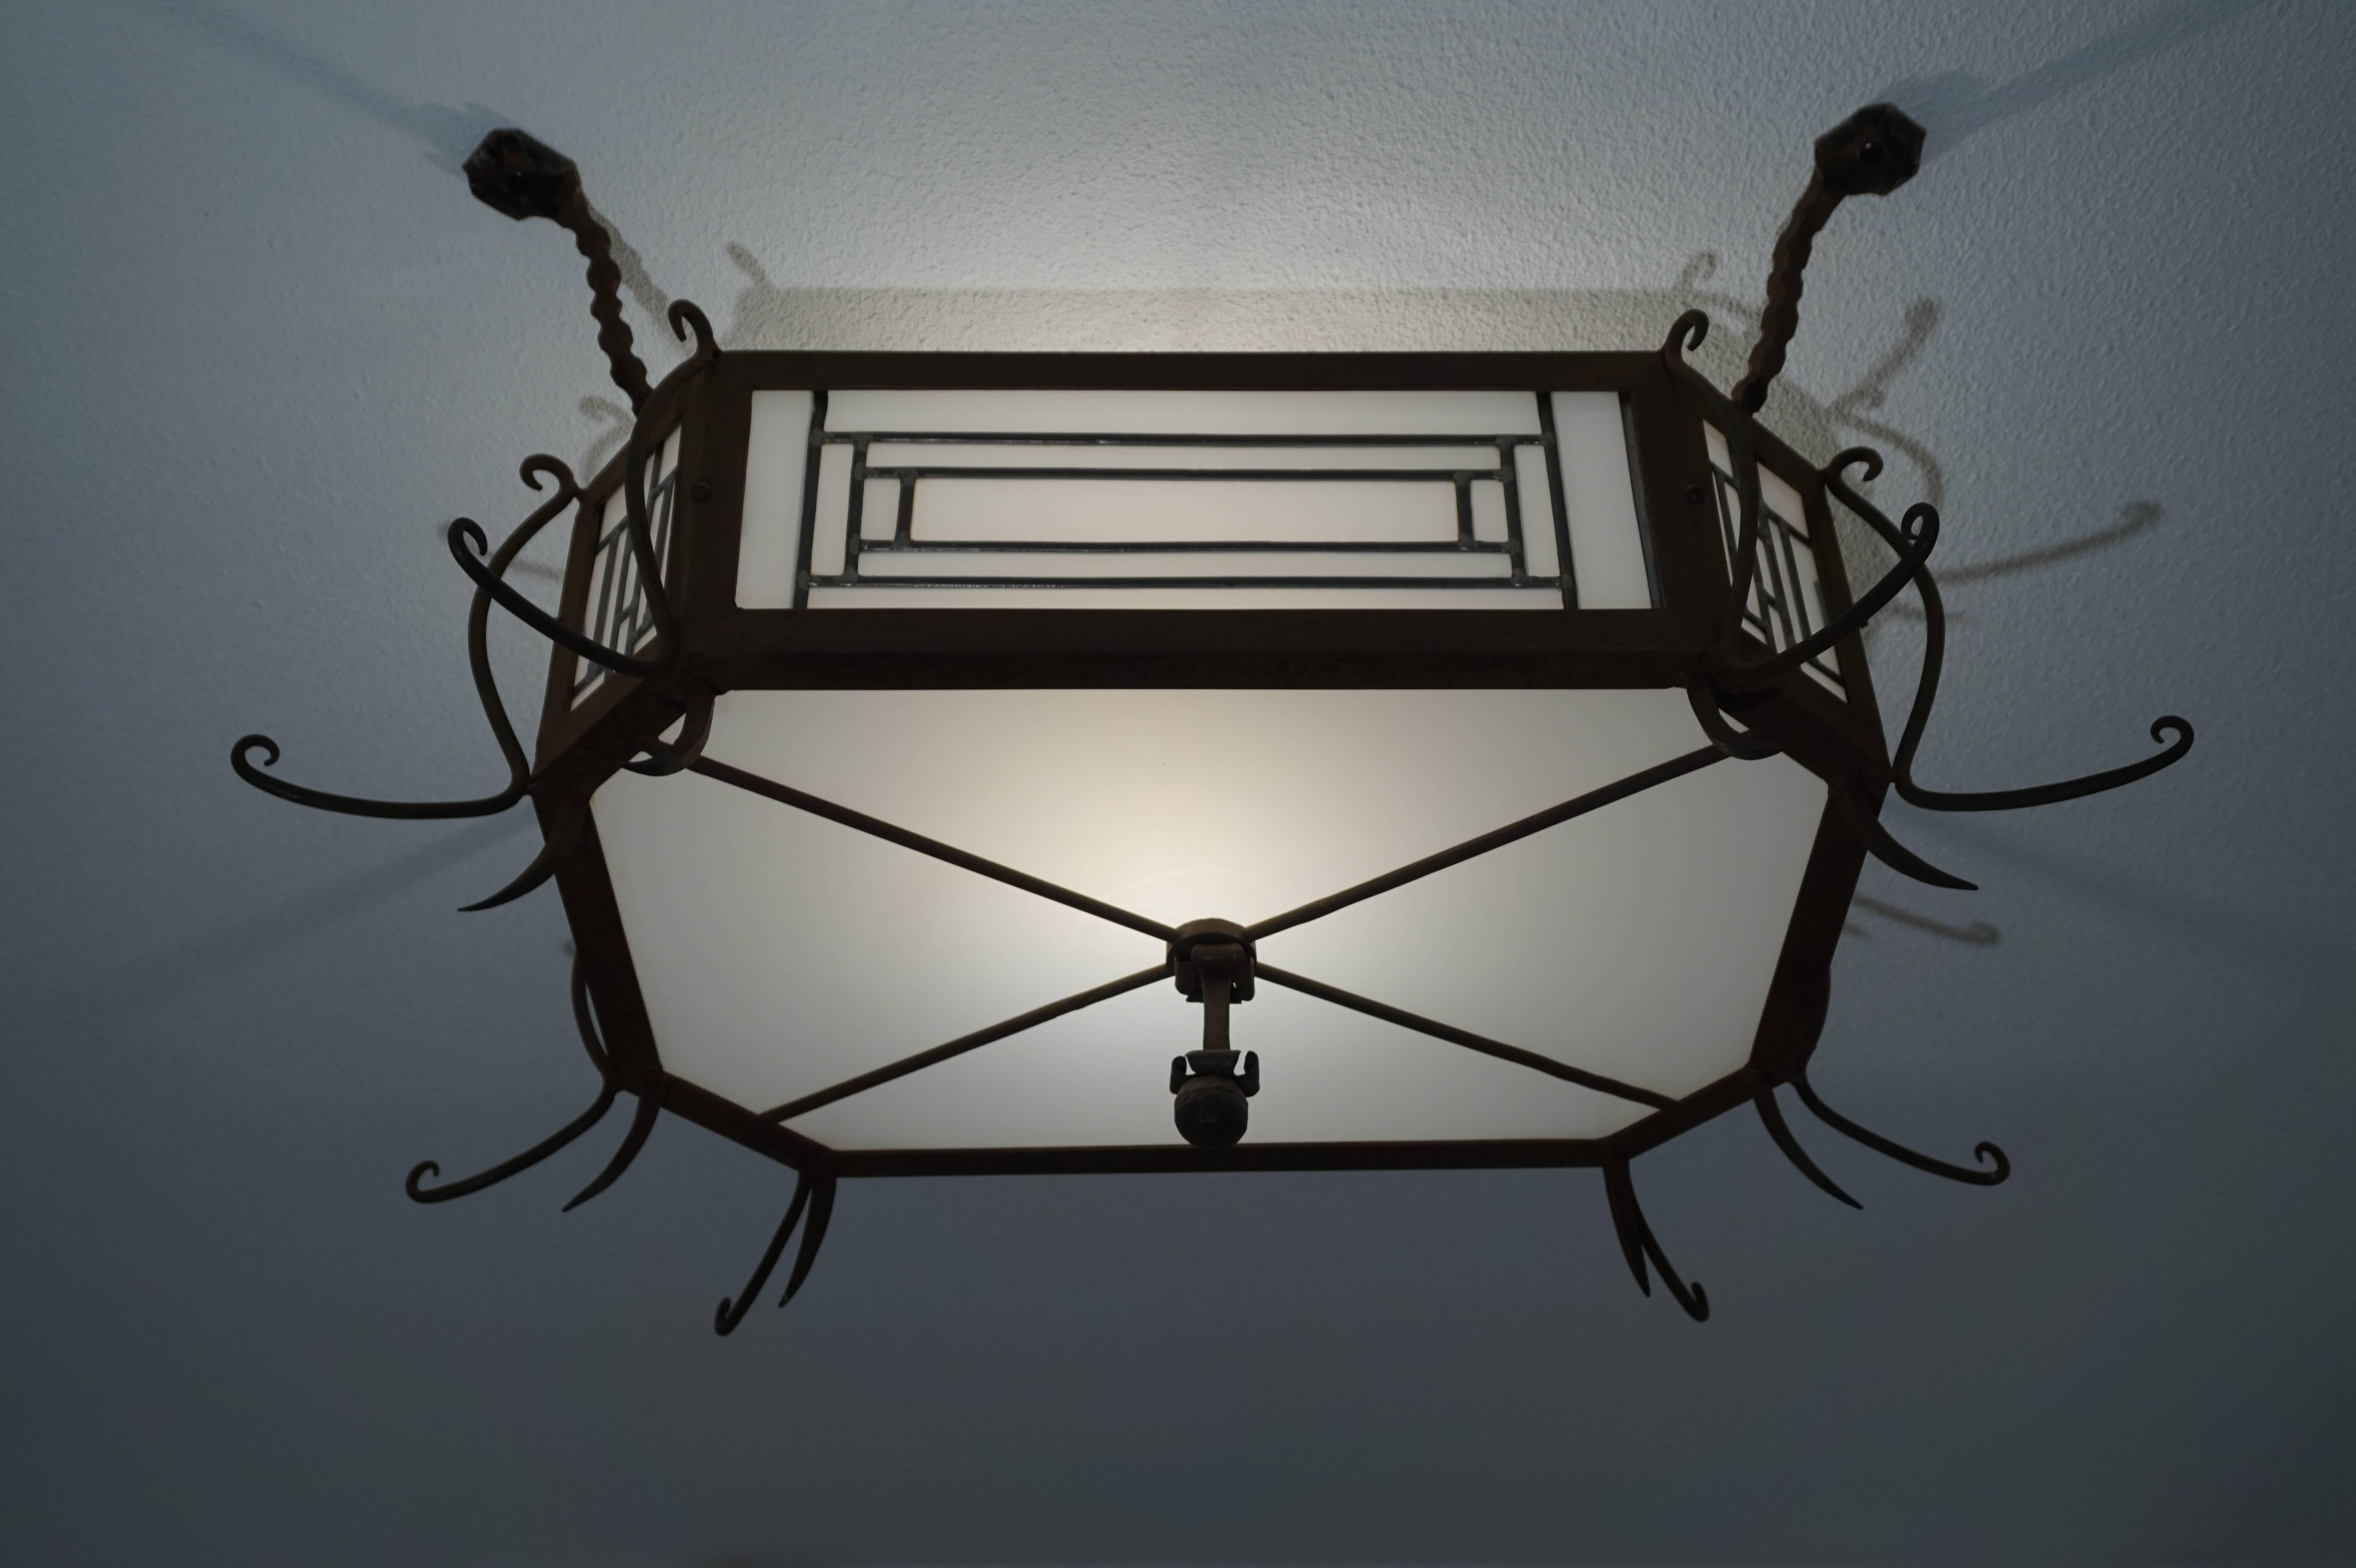 Unique and all handcrafted Art Deco flush mount.

Some antiques you only find once in your life and this is definitely the case with this hand-forged, early 20th century flush mount. This wrought iron and stained leaded glass fixture was made for a